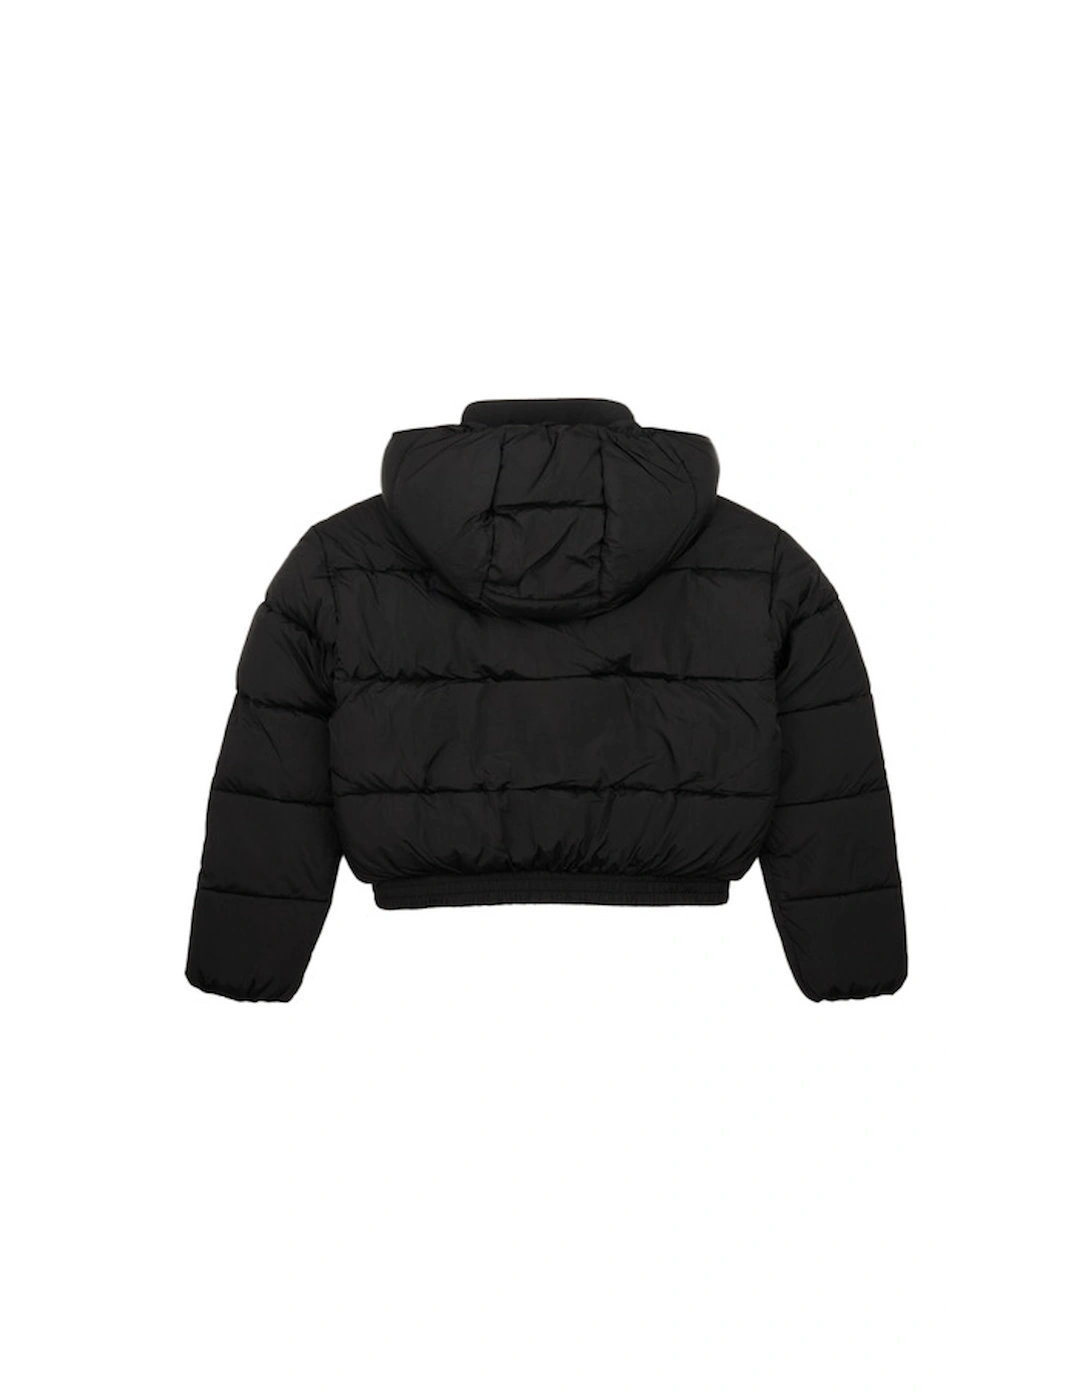 CK ARCHIVE PUFFER JACKET